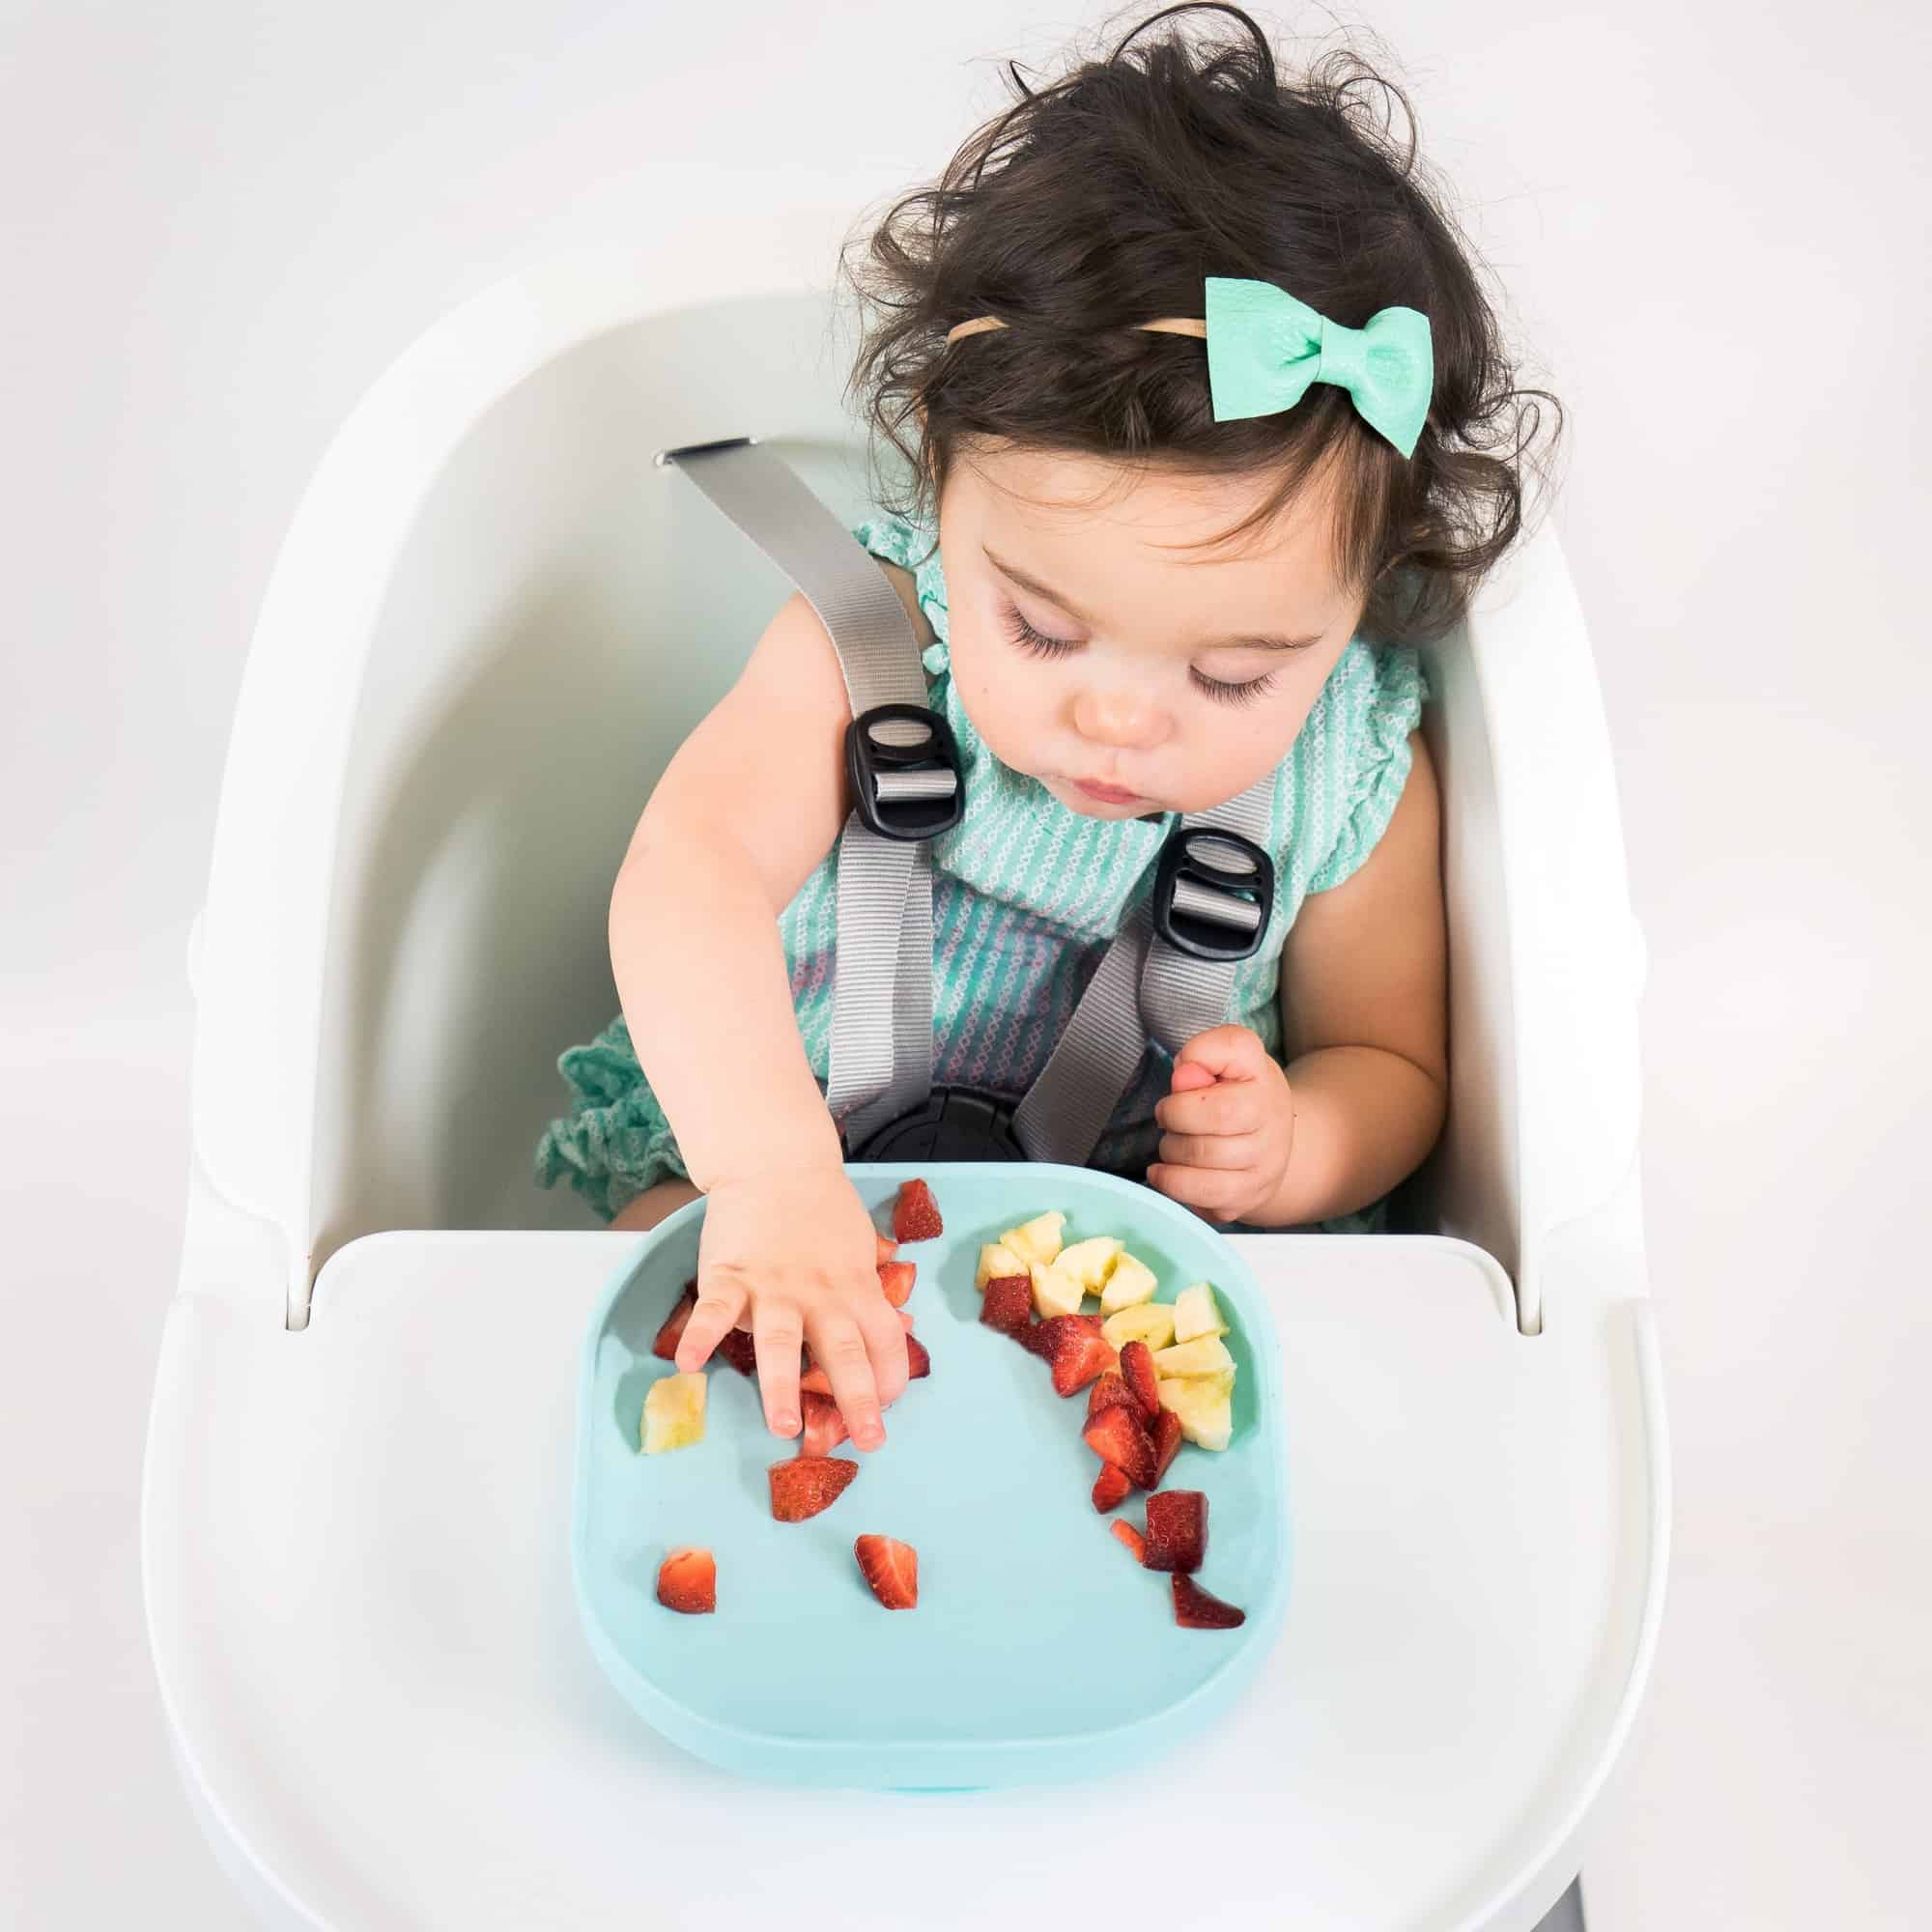 Toddler picking fruit from silicone suction meal set pastel